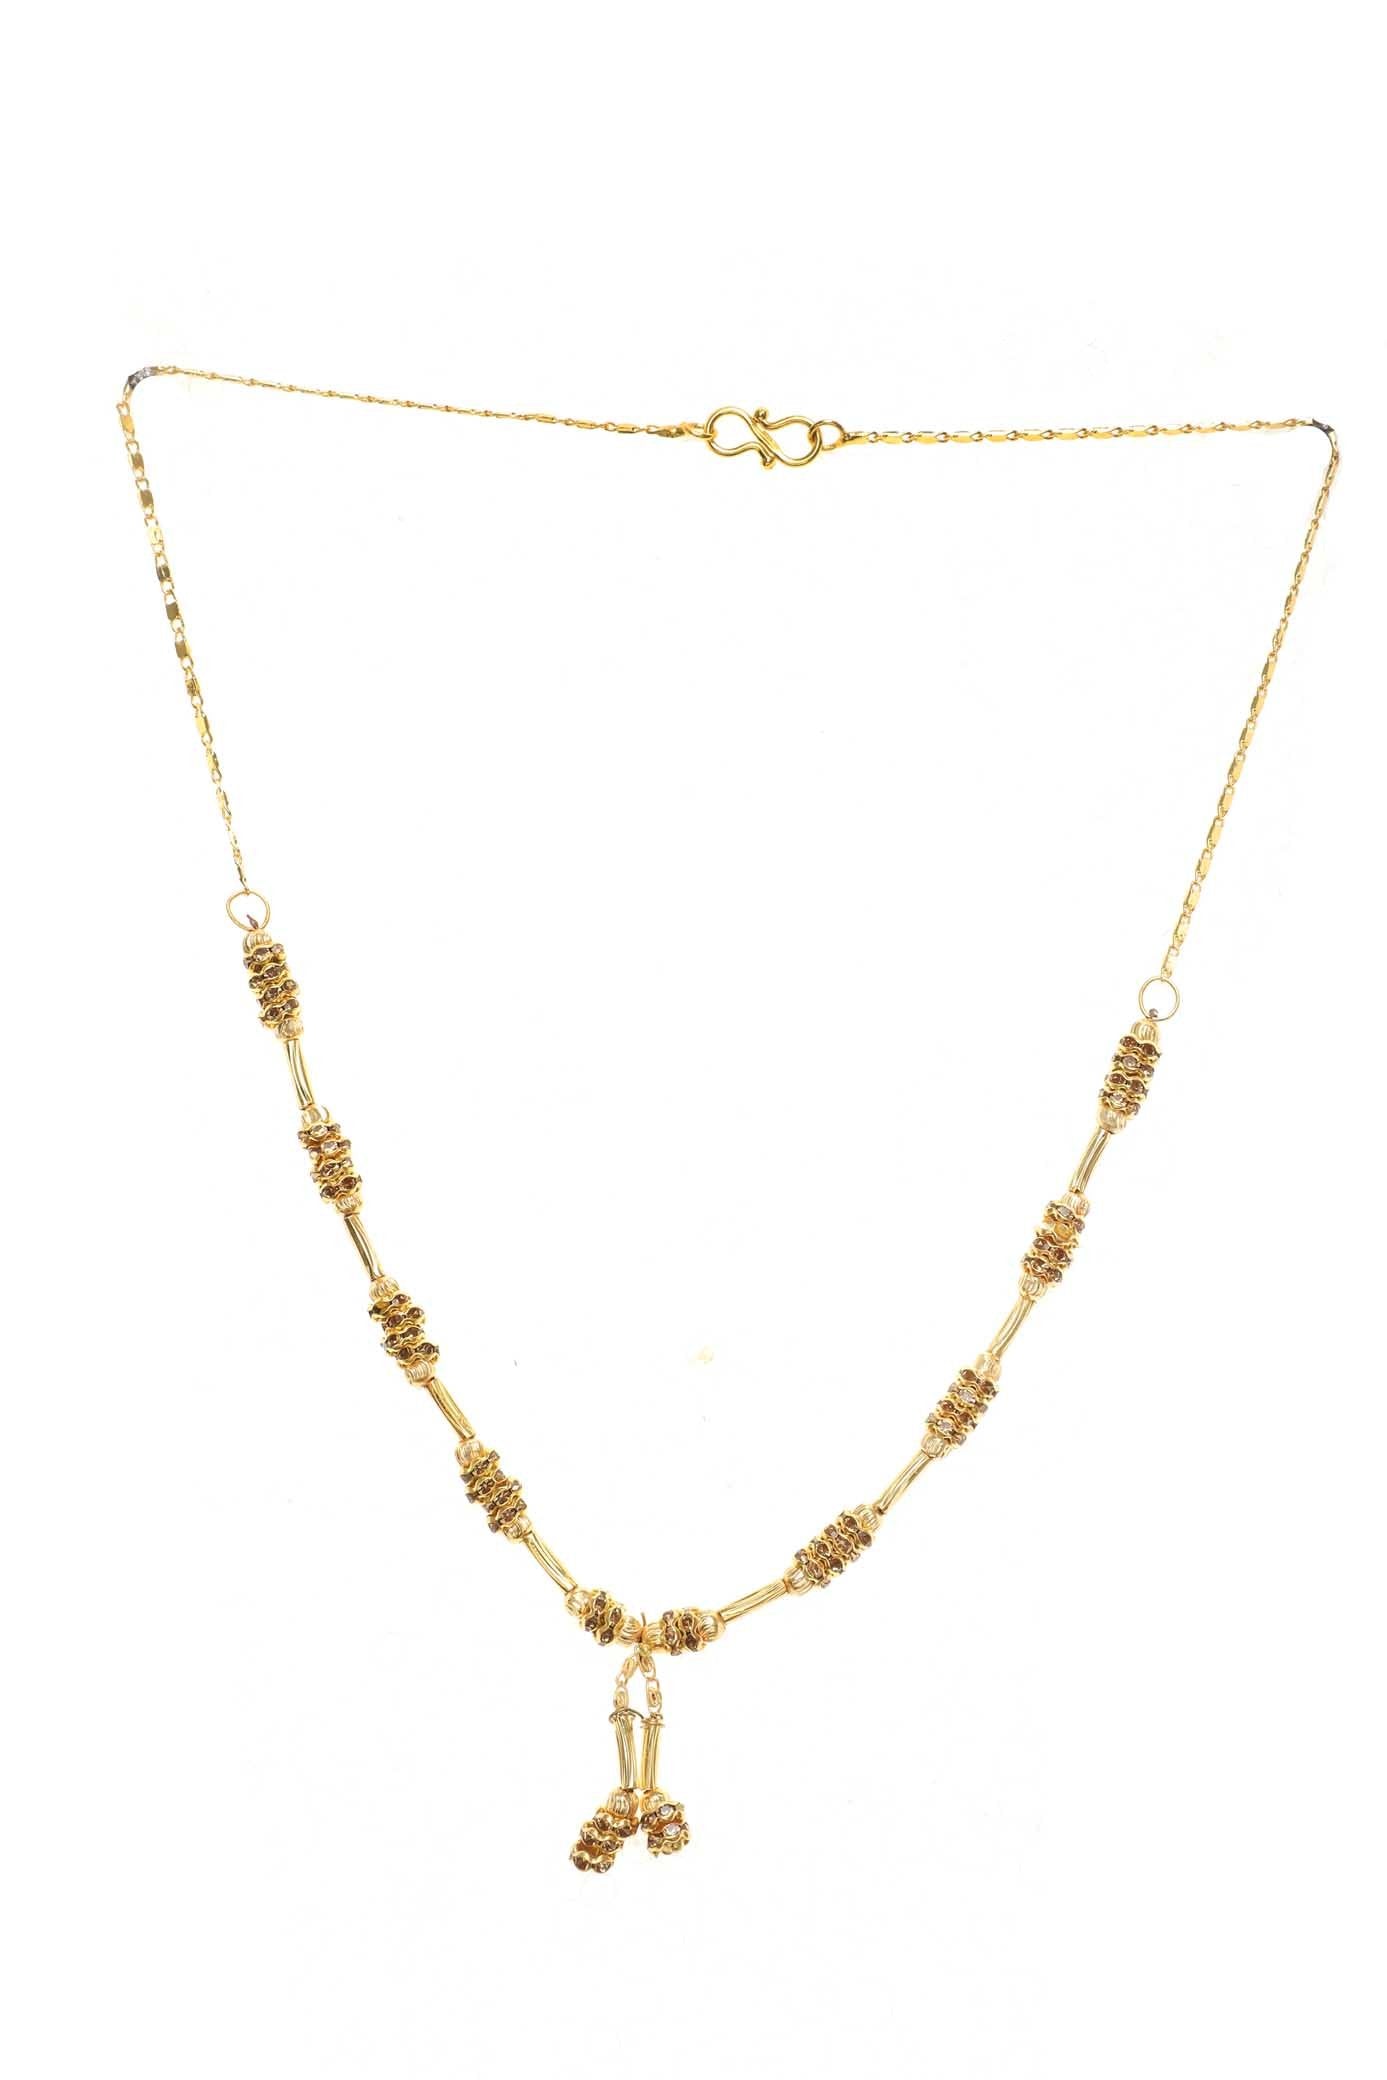 Indian Jewellery from Meira Jewellery:Chain Necklace,Trendy Golden Chain Necklace MJ-DOK-HD-02CG